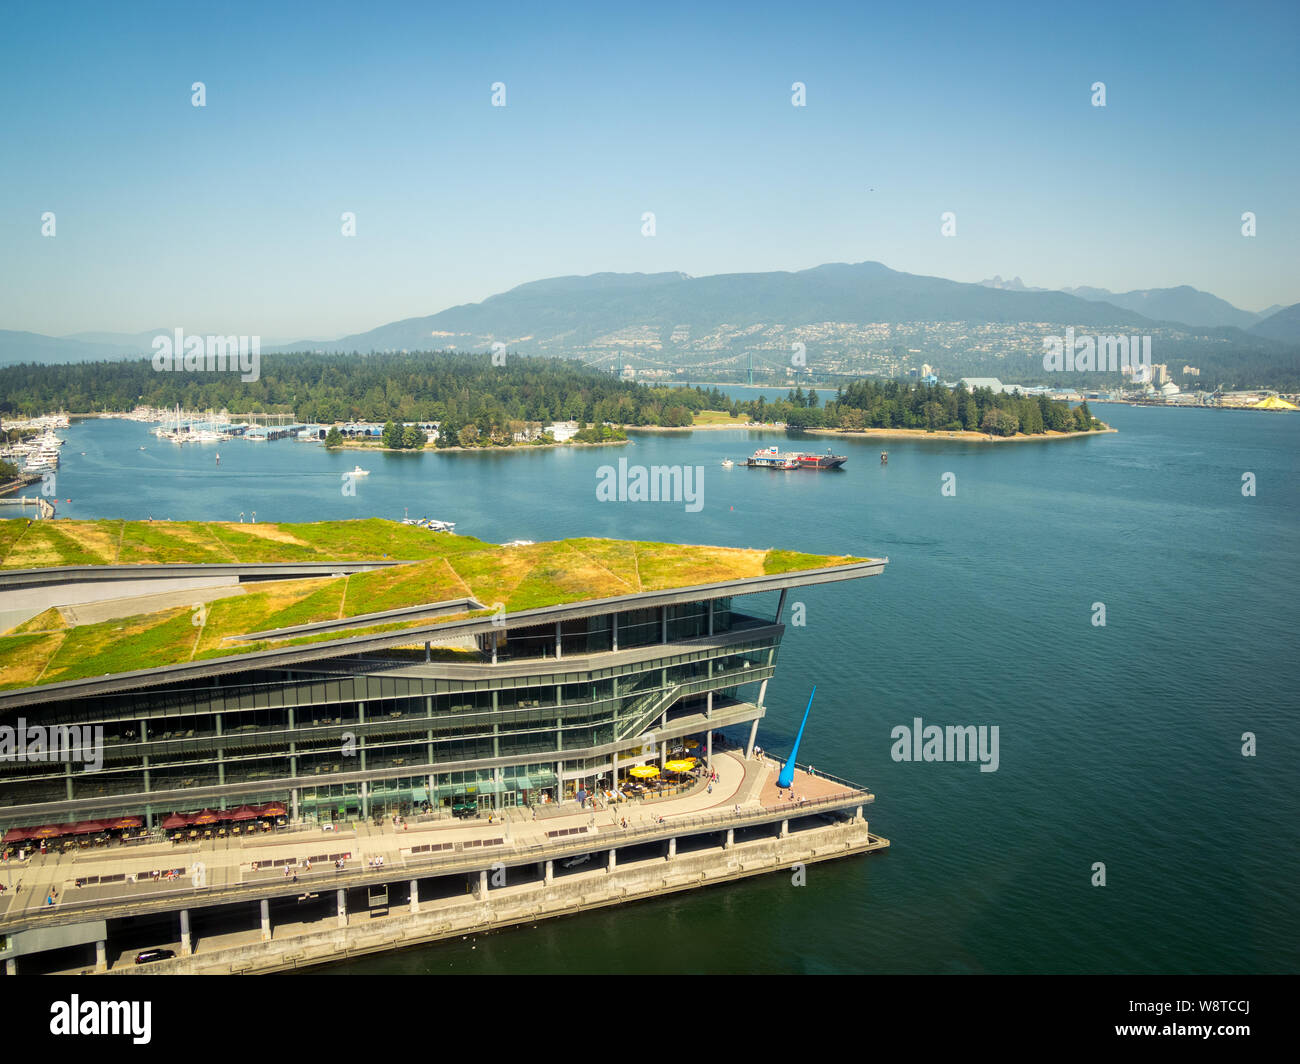 An aerial view of the green roof of the West Building of the Vancouver Convention Centre (Vancouver Convention Center) in Vancouver, British Columbia. Stock Photo